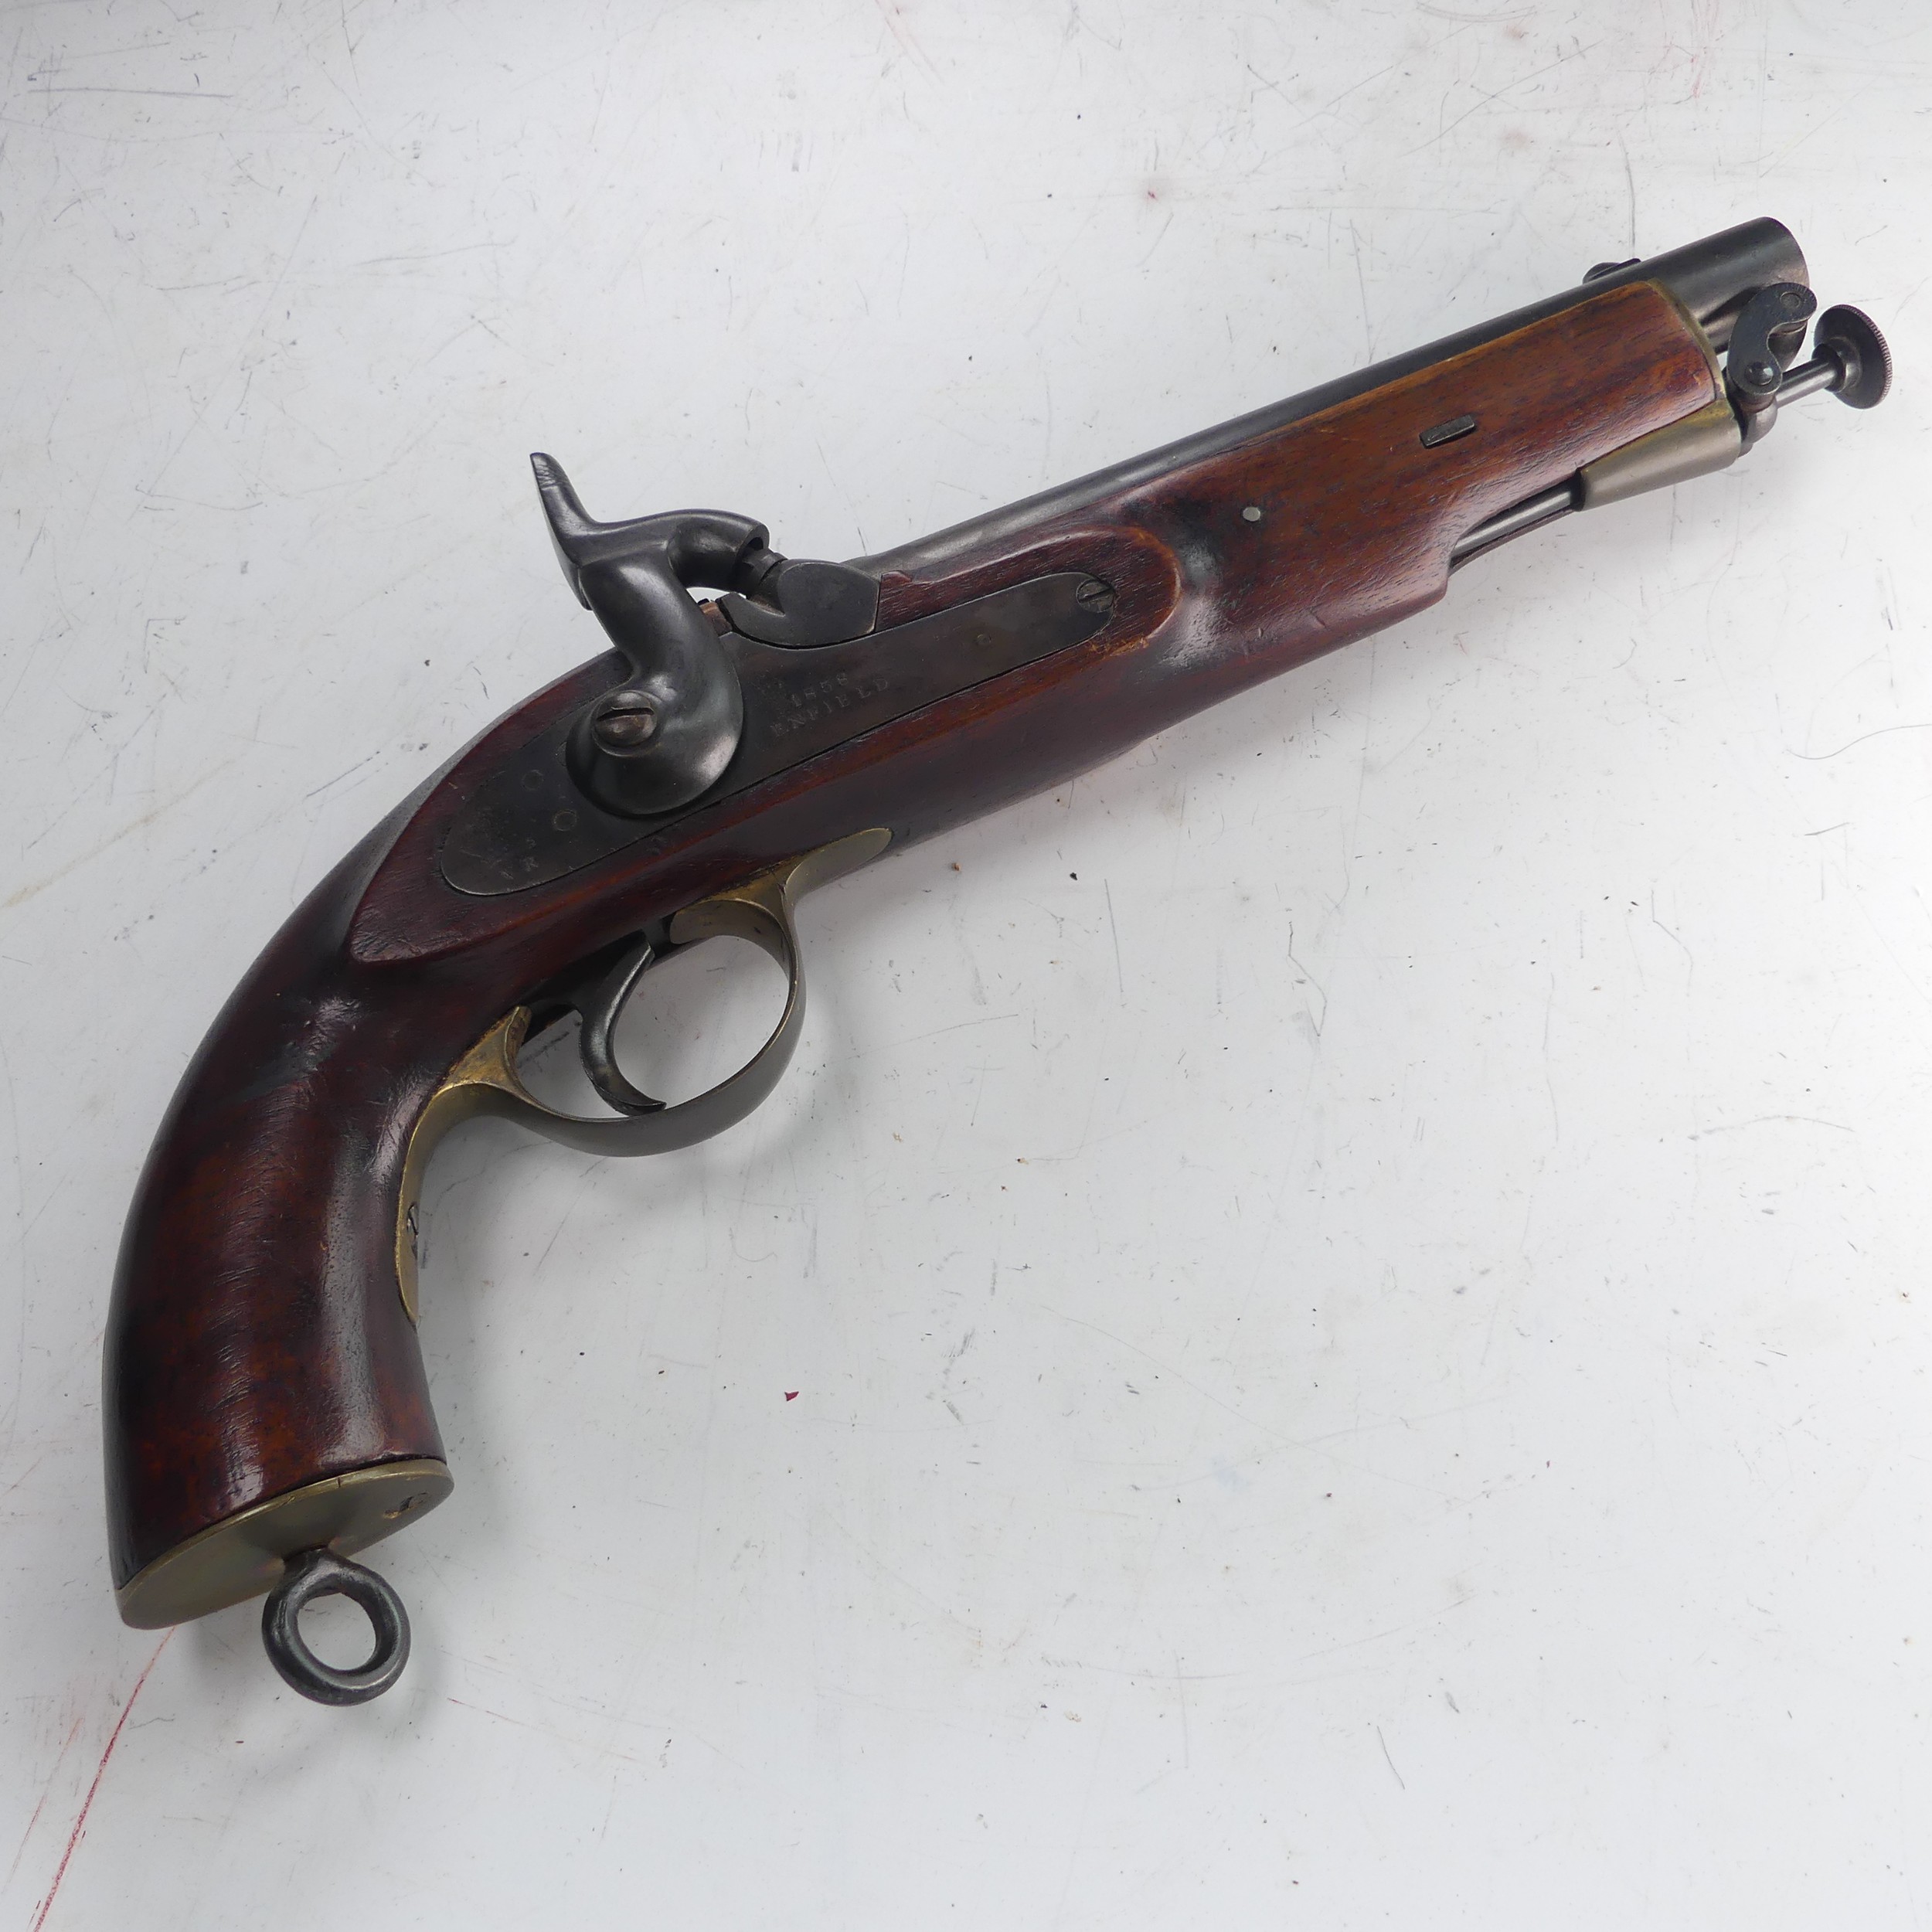 A 19th century 'Enfield' percussion cap service Pistol, with walnut stock, 8 inch steel barrel, - Image 3 of 7